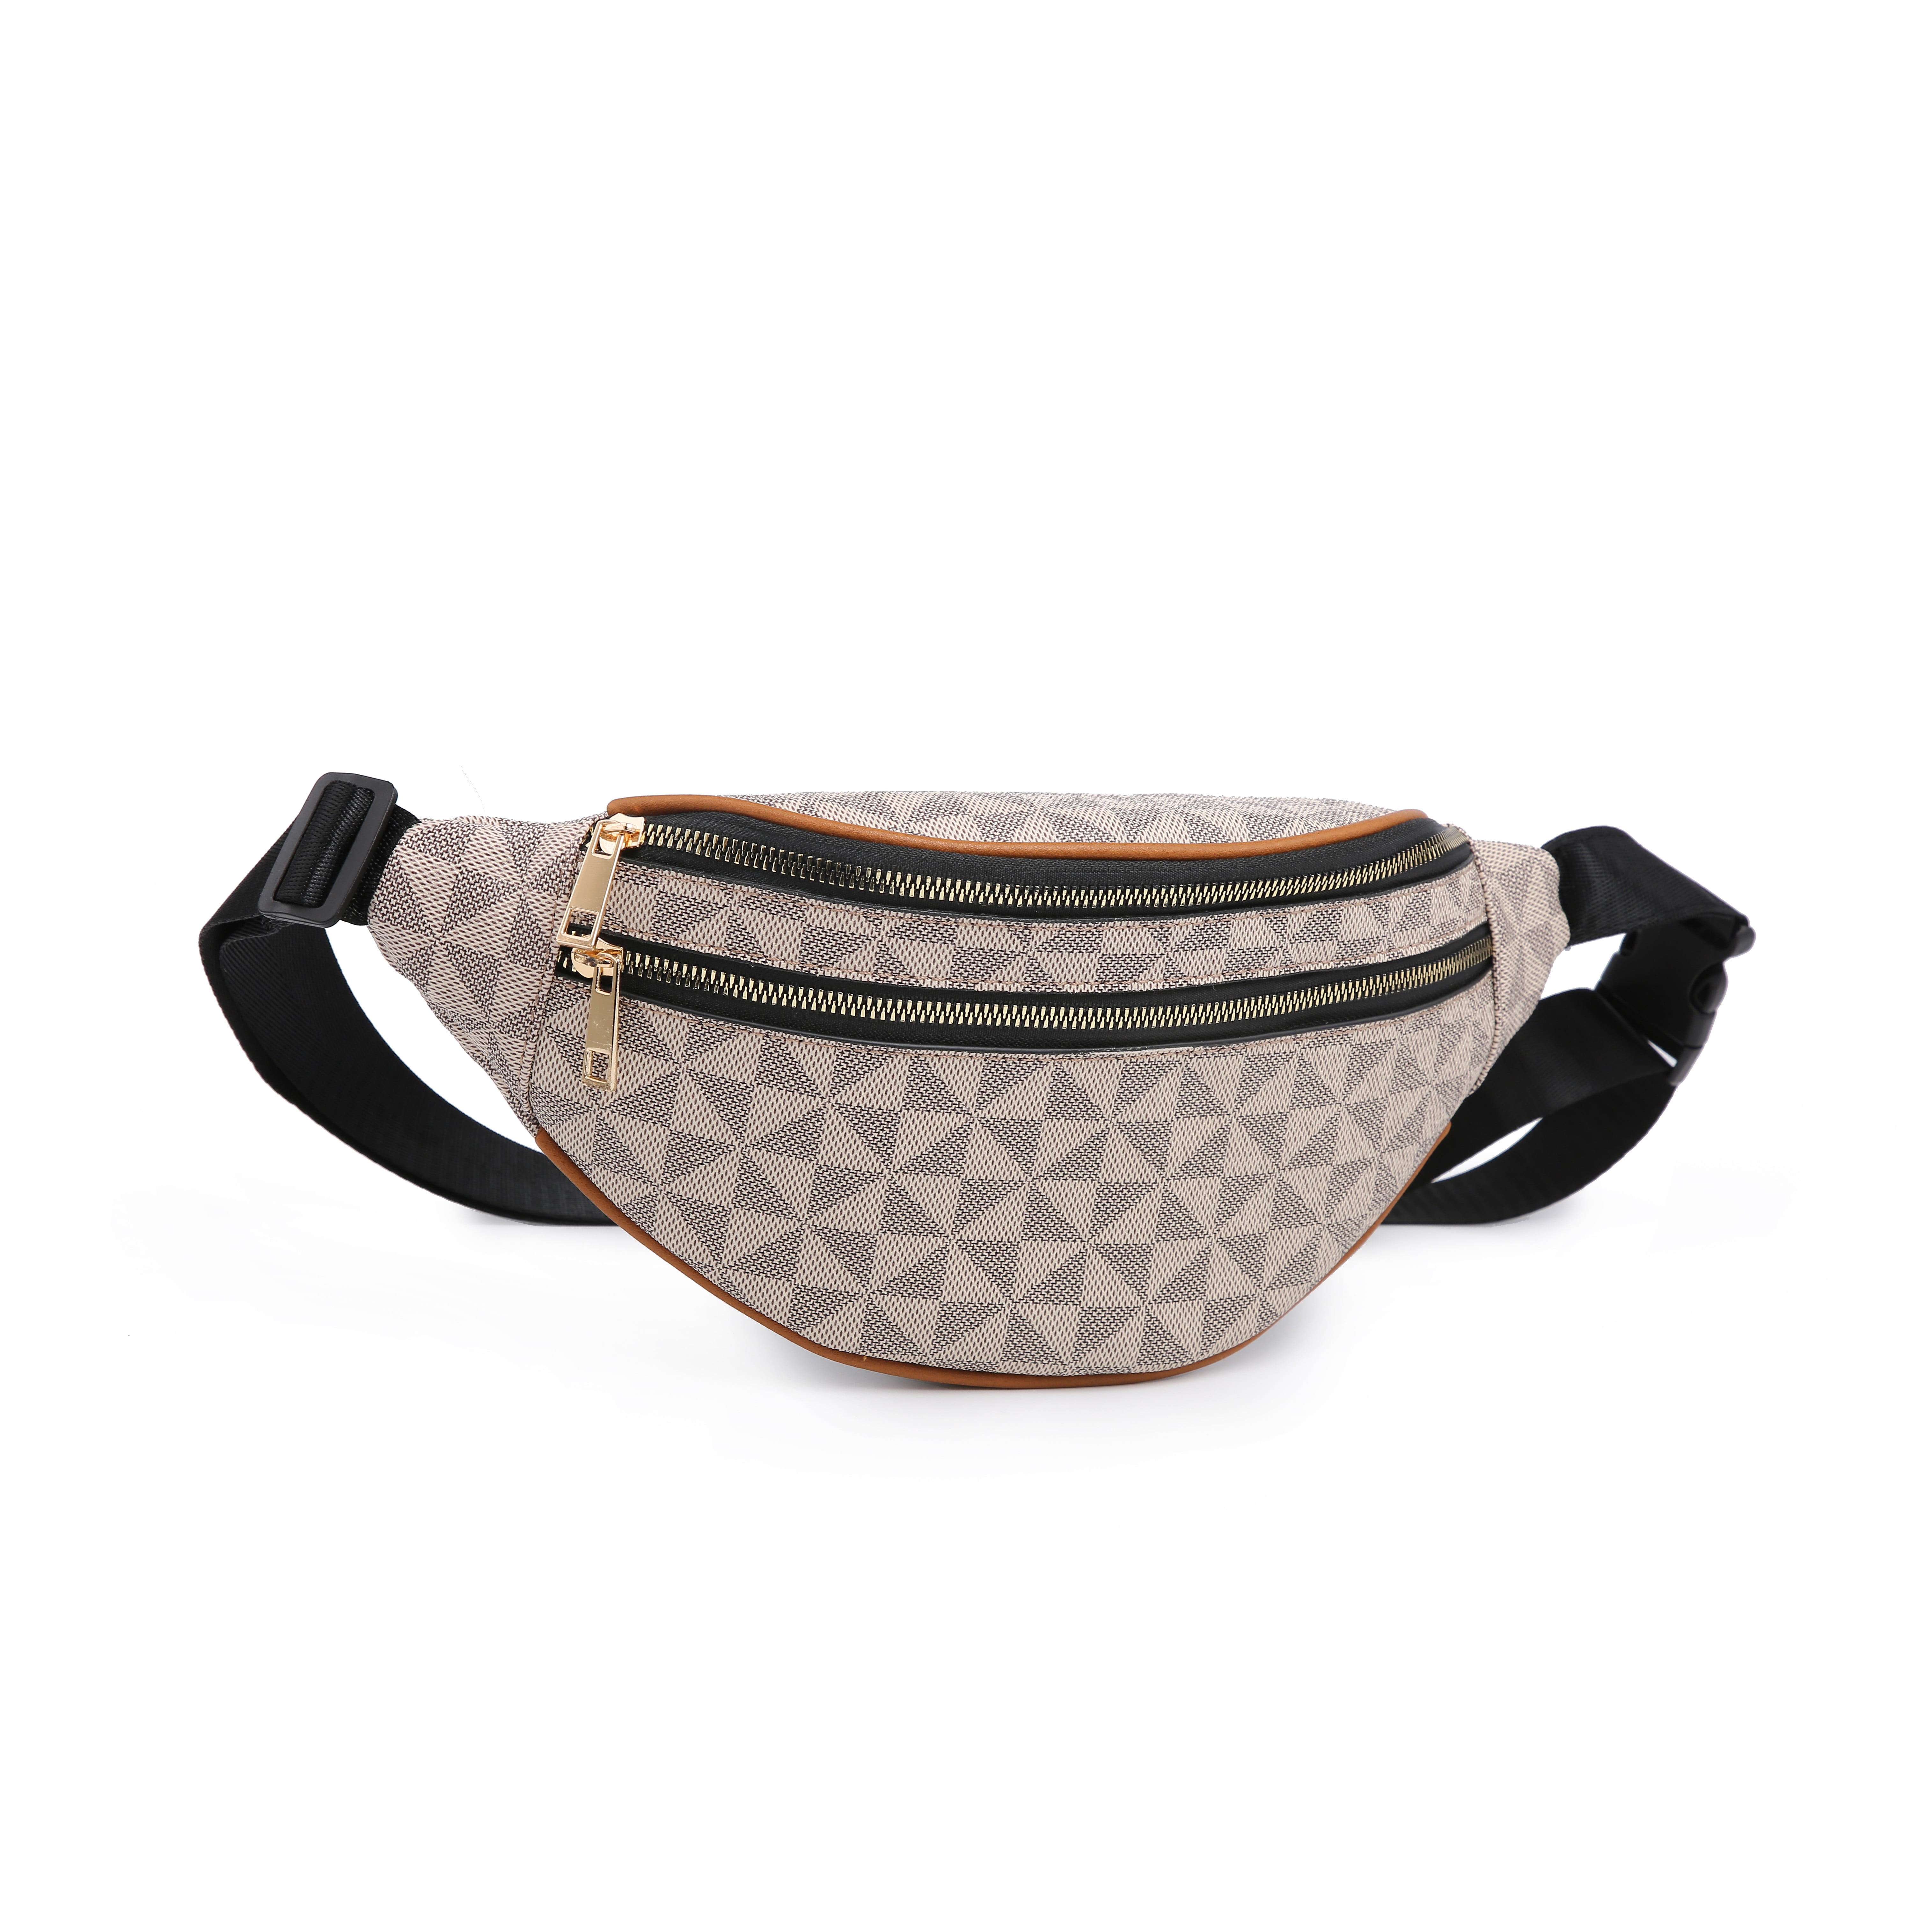 Tocco Toscano Adric Smart Casual Waist Pouch with top zipper pocket -  TGWP1213PN3MK2 | Miroza Online Shop